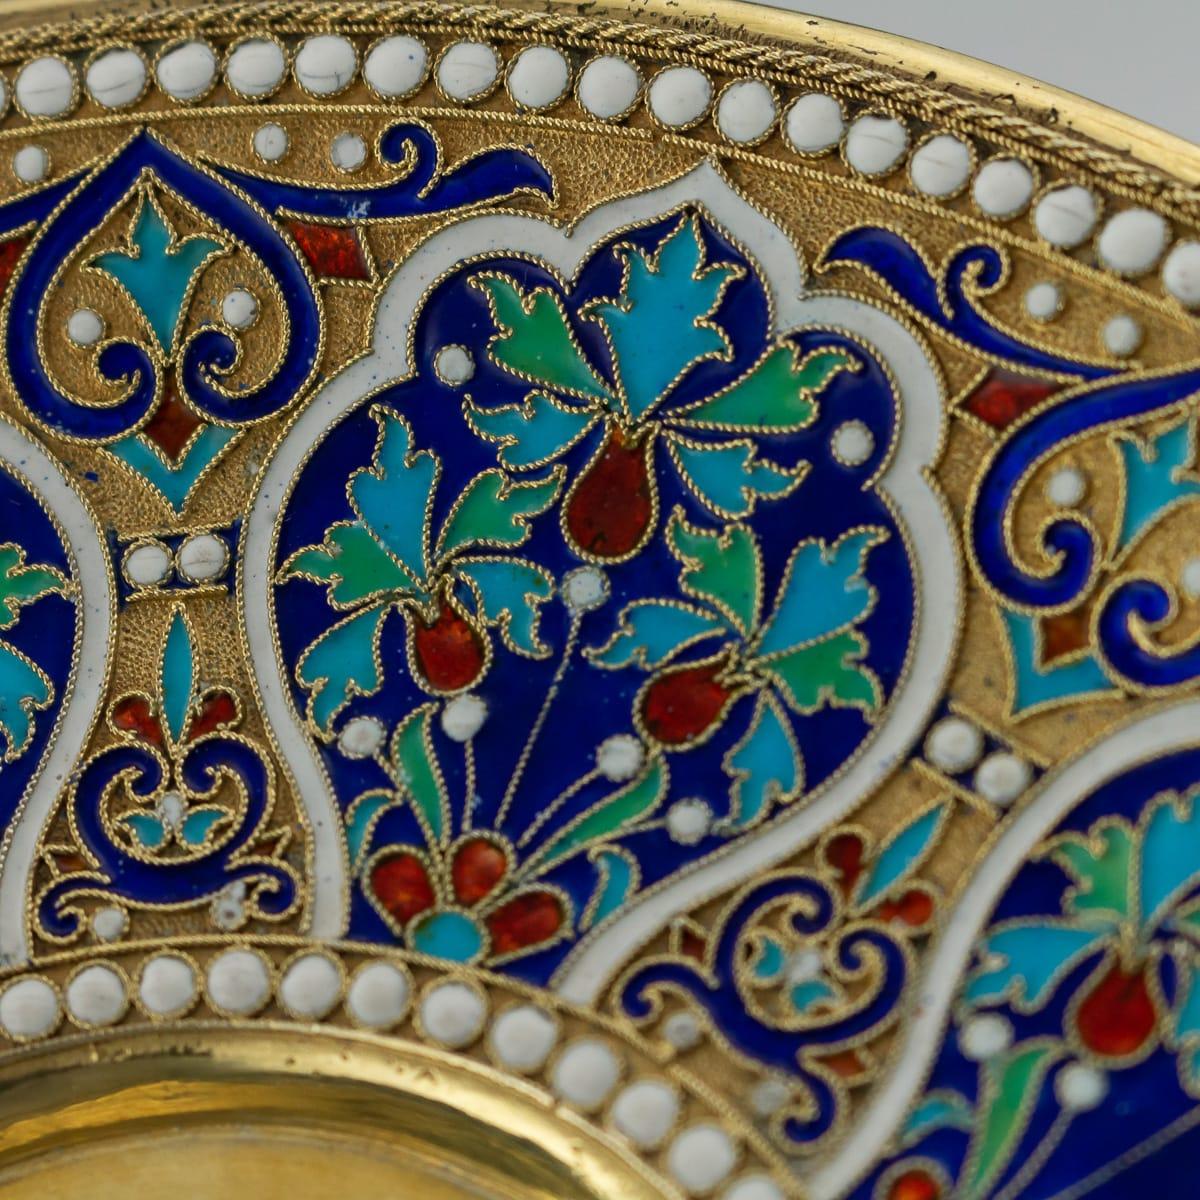 Cloissoné 19th Century Imperial Russian Solid Silver-Gilt and Enamel Cup on Saucer